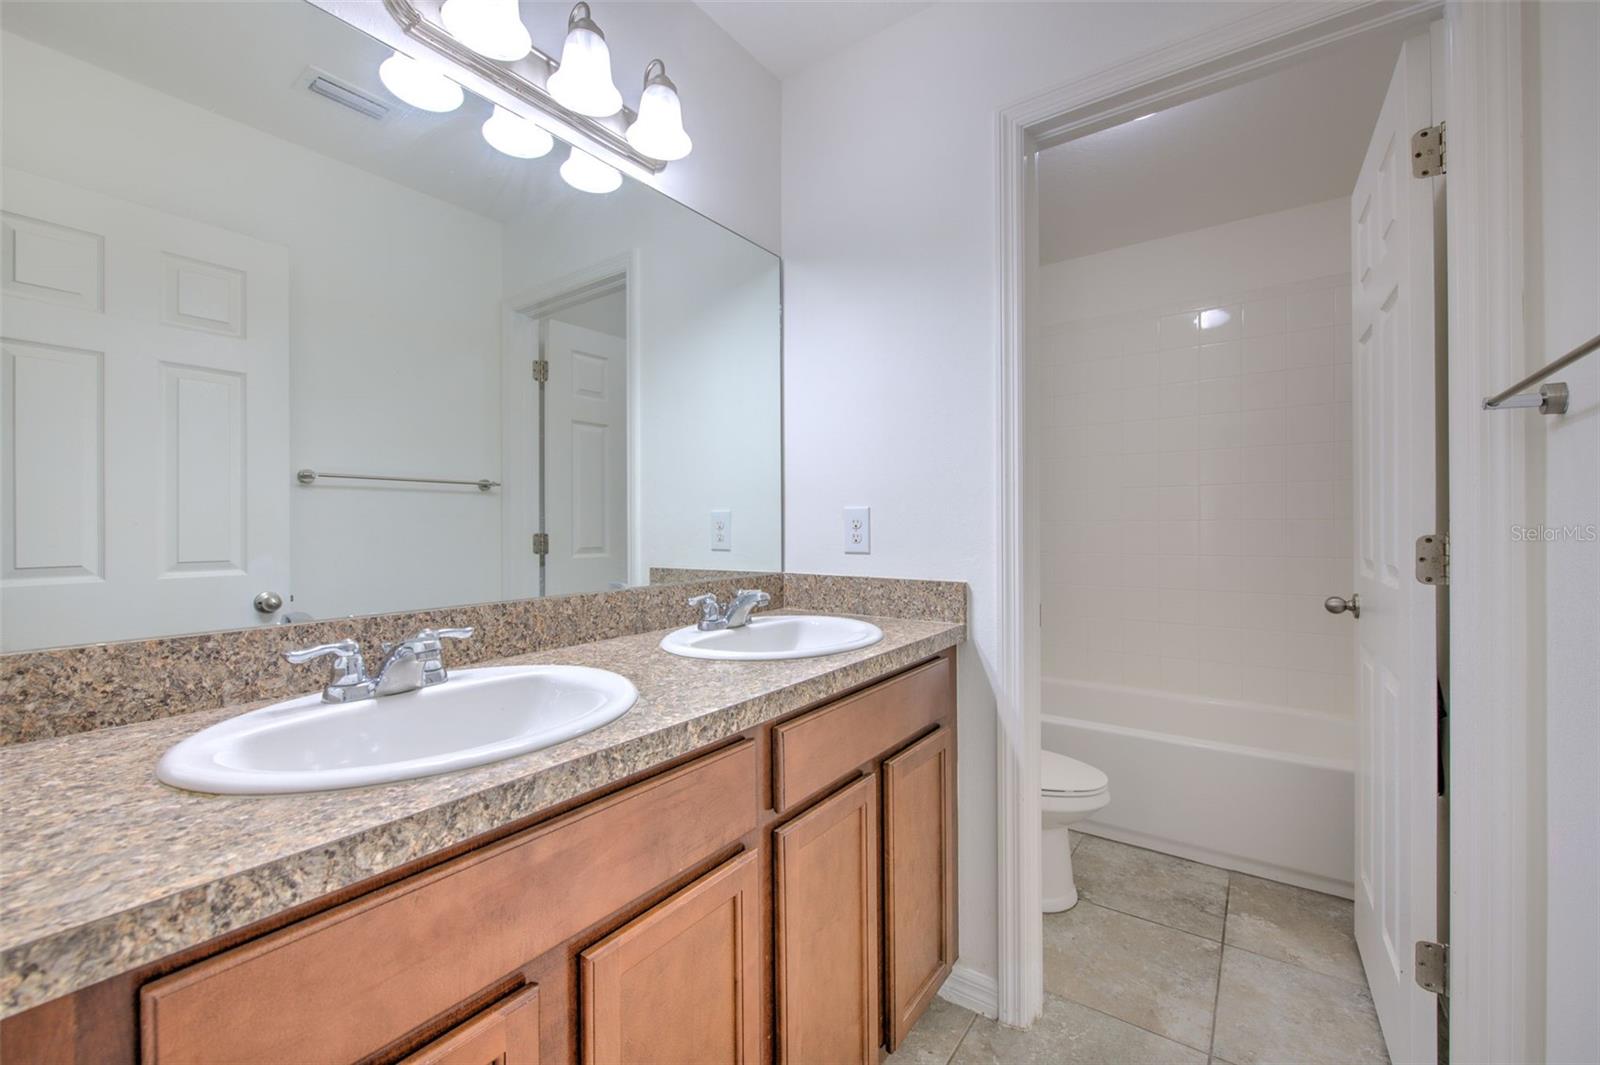 4th bathroom located between the secondary bedrooms upstairs. Dual vanity, shower/tub combo.